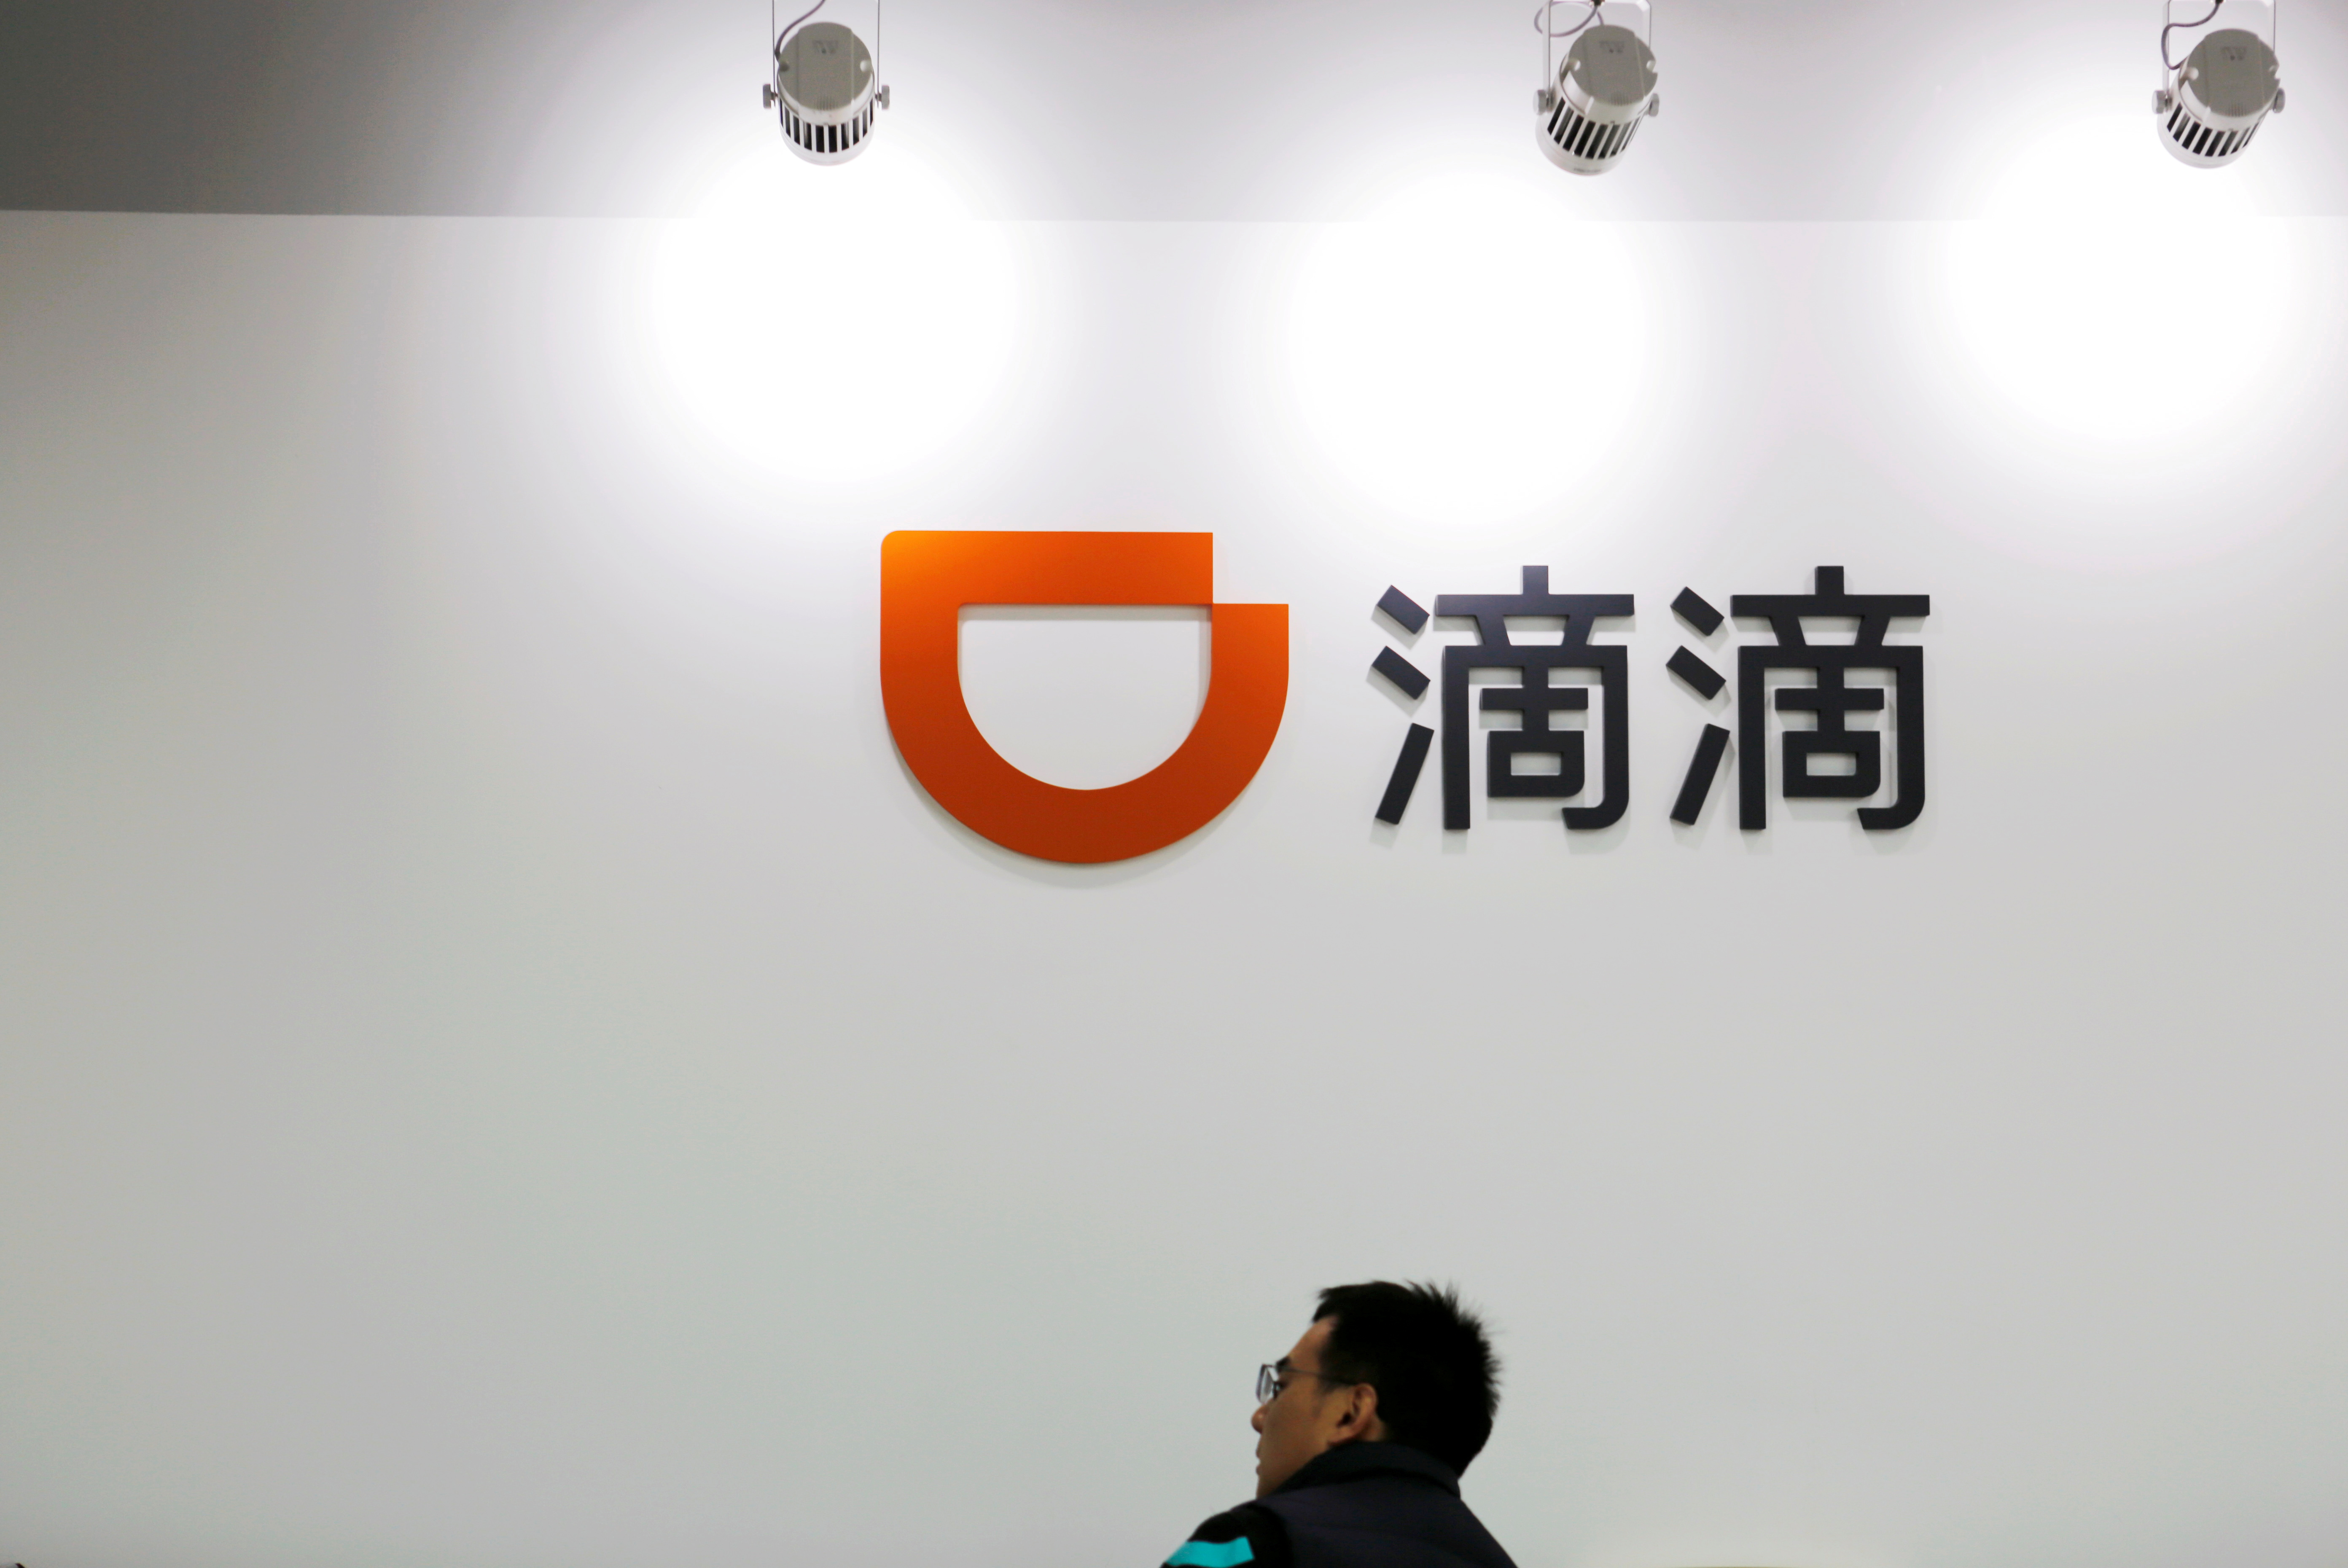 Exclusive China S Didi Leans Towards New York For Ipo Eyes Valuation Of At Least 100 Bln Sources Reuters